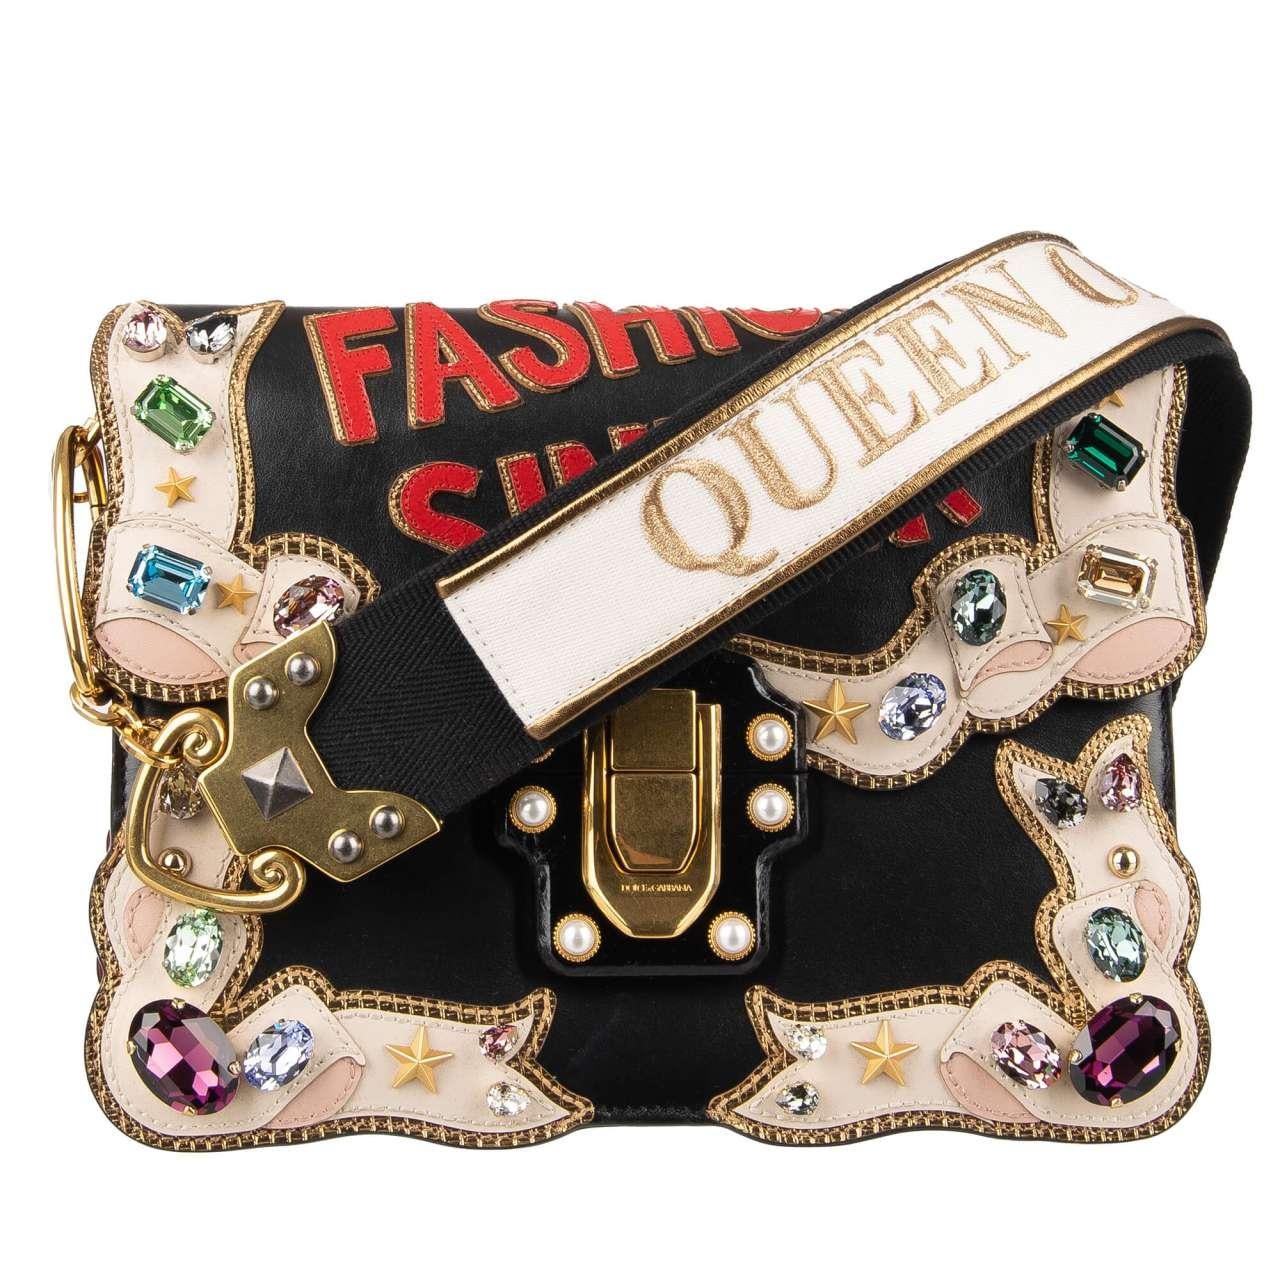 - Jeweled shoulder bag LUCIA Fashion Sinner with multicolor crystals, studs, DG logo and embroidered 